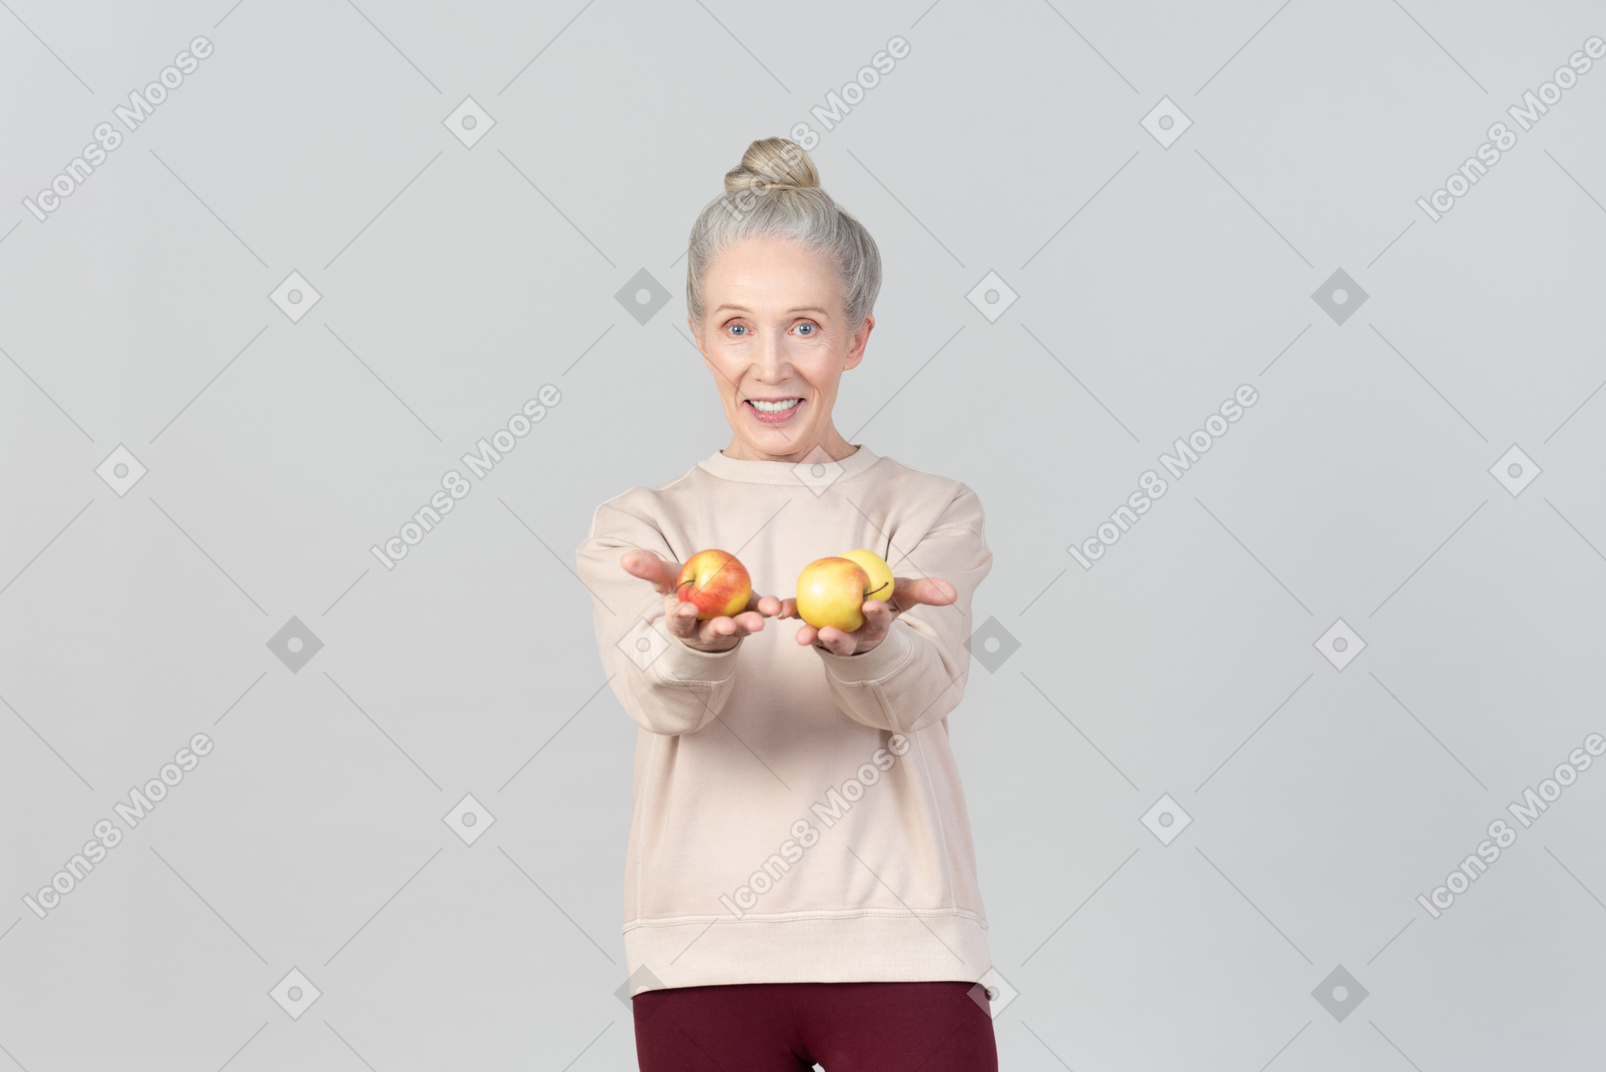 Smiling old lady with apples